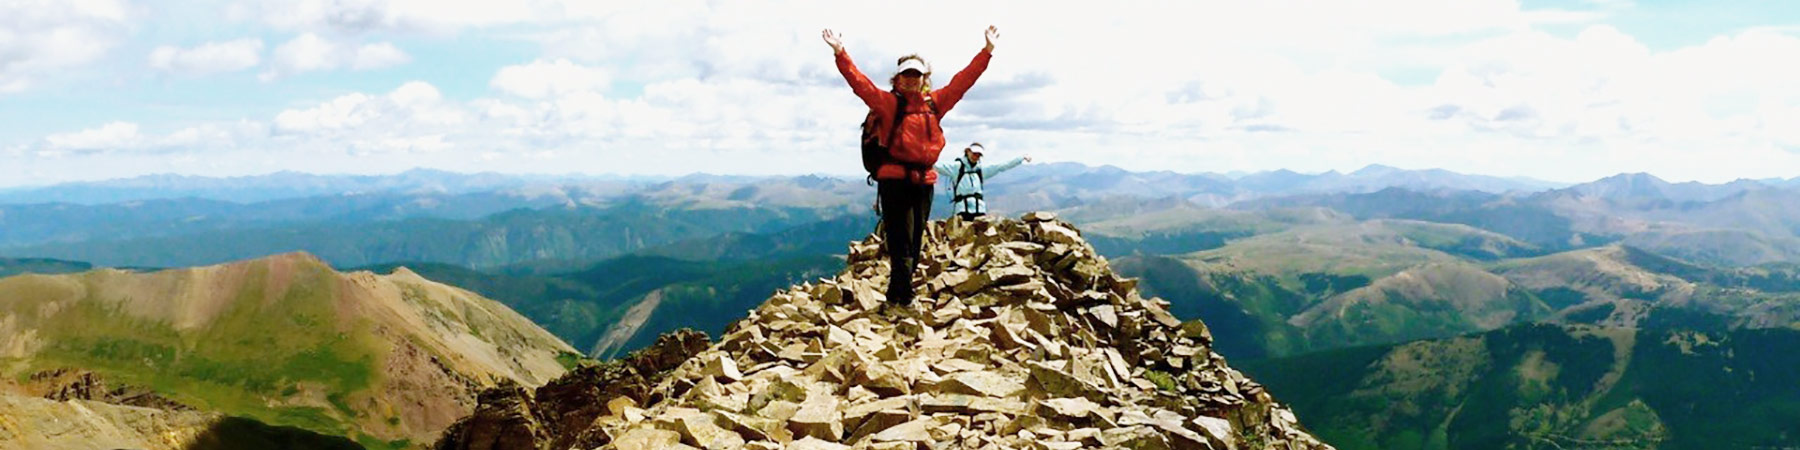 Beth Wille touches the sky as she conquers the North Maroon Peak ascent